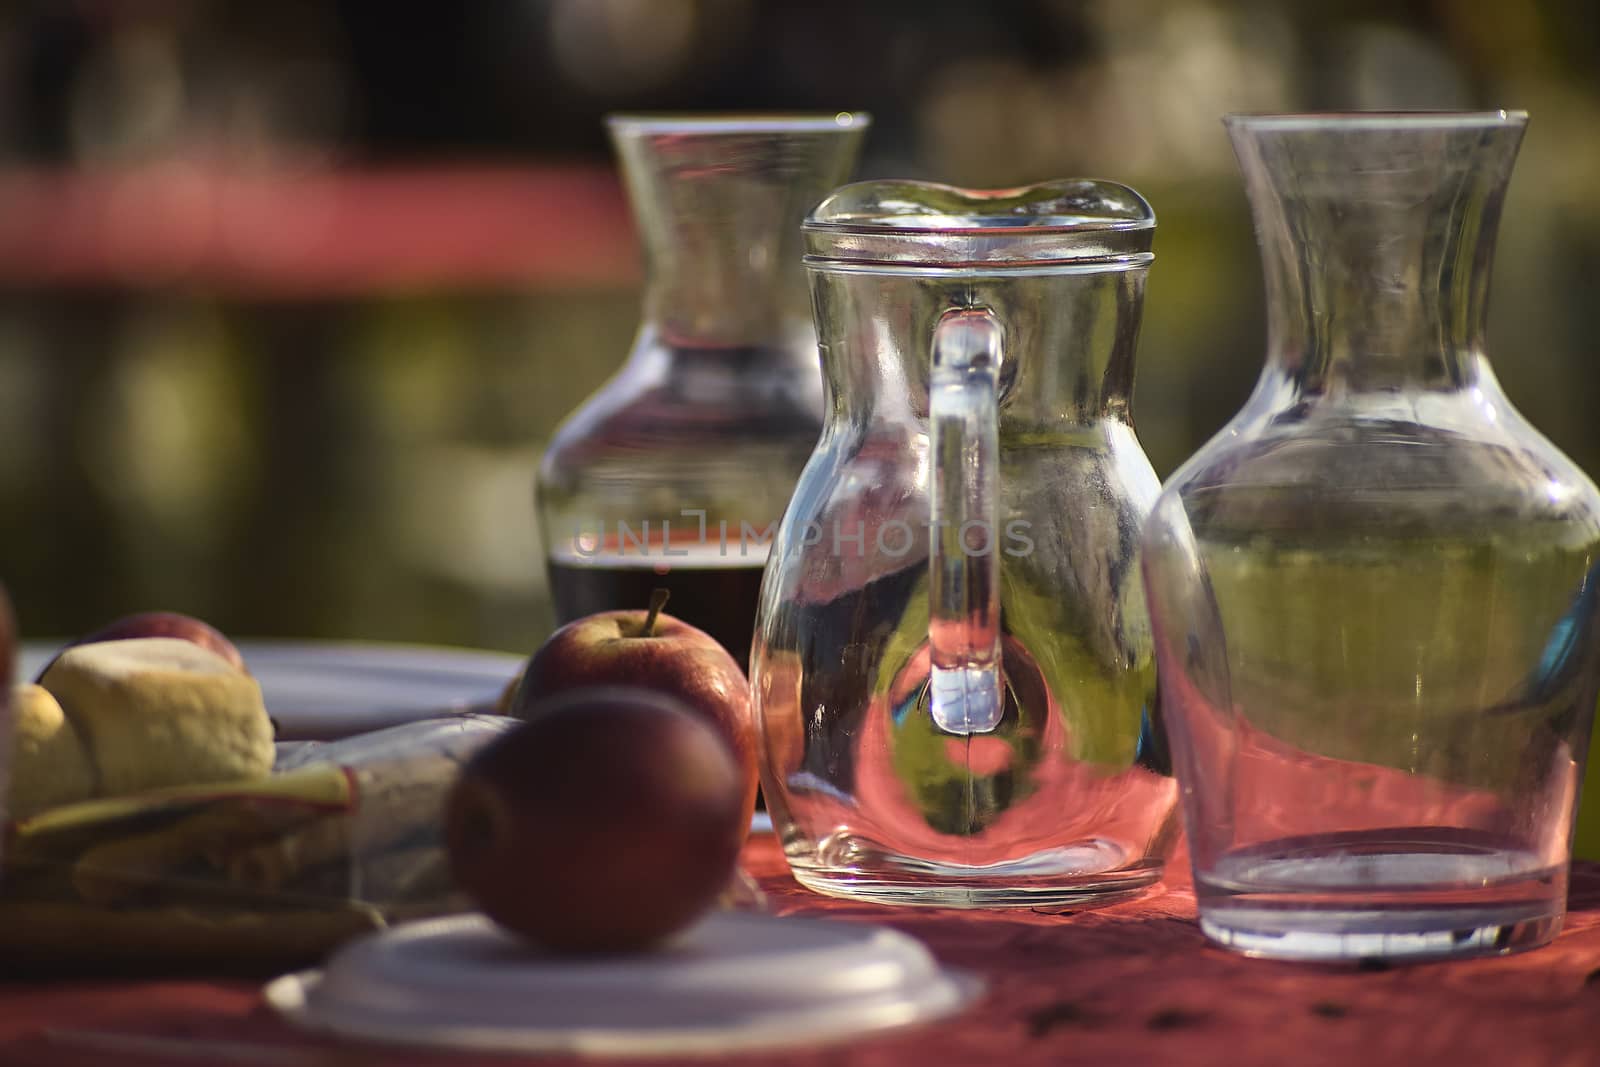 A table set in a Venetian tavern, featuring wine glasses, apples and breads in the foreground, all ready to serve lunch. Image with a predominant red color contrasting with the transparency of the glass of the carafe.